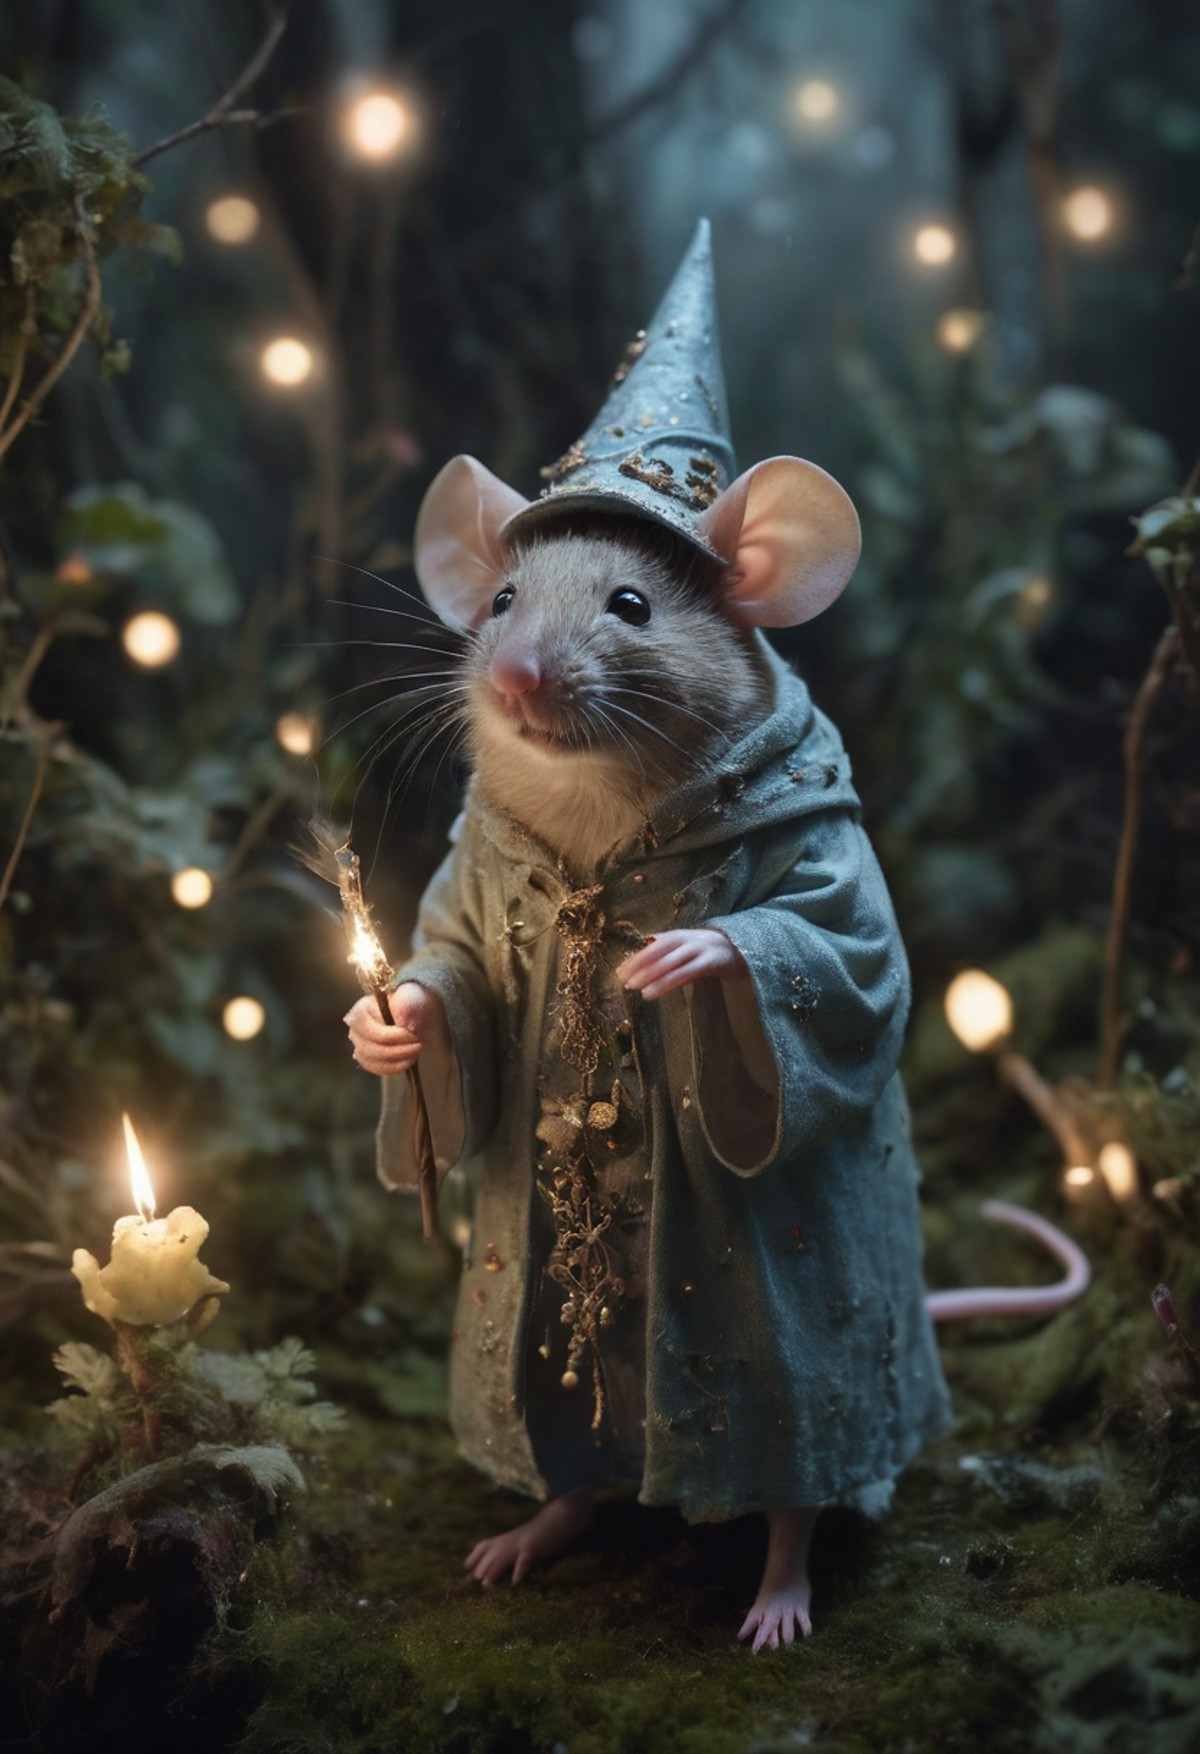 A whimsical photograph of a spellcaster mouse in a miniature enchanted forest, inspired by the works of Tim Walker. Magica...